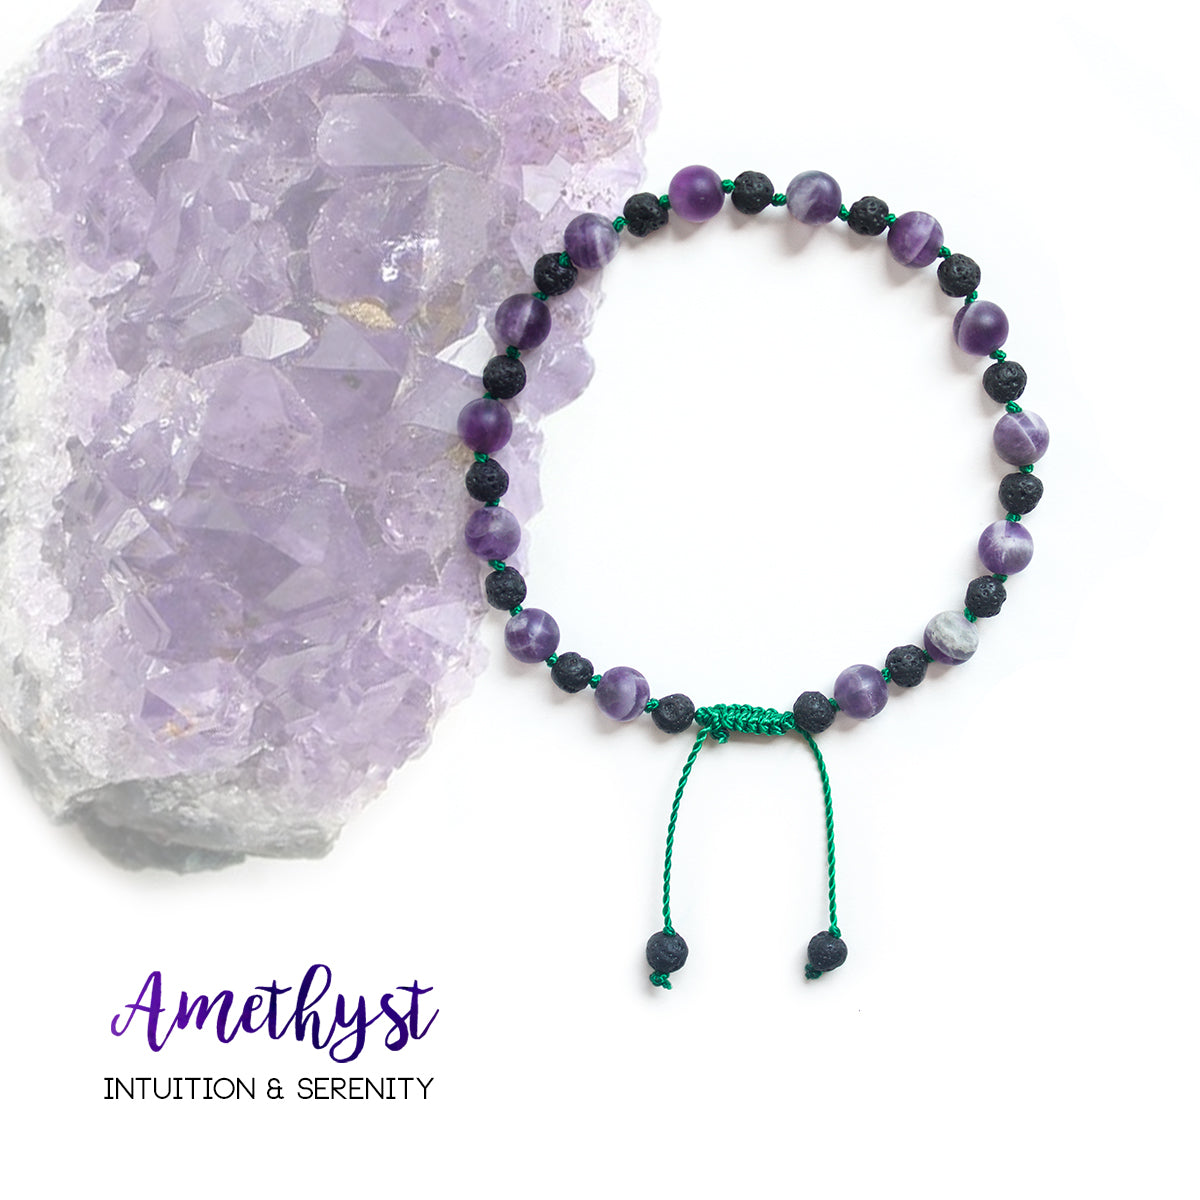 Amethyst: Stone of Intuition & Spirituality